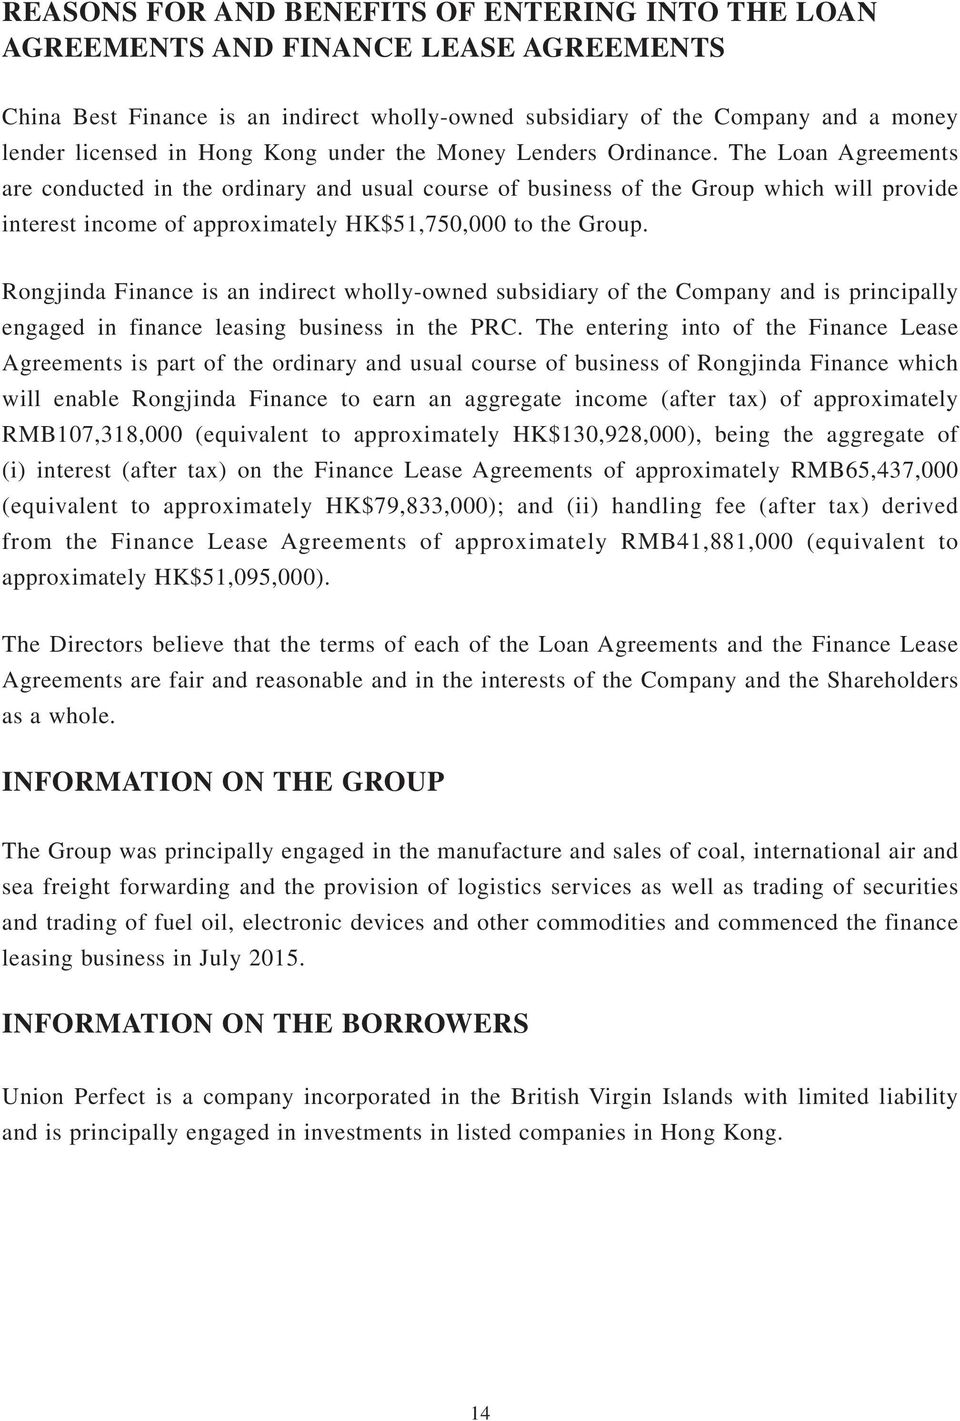 The Loan Agreements are conducted in the ordinary and usual course of business of the Group which will provide interest income of approximately HK$51,750,000 to the Group.